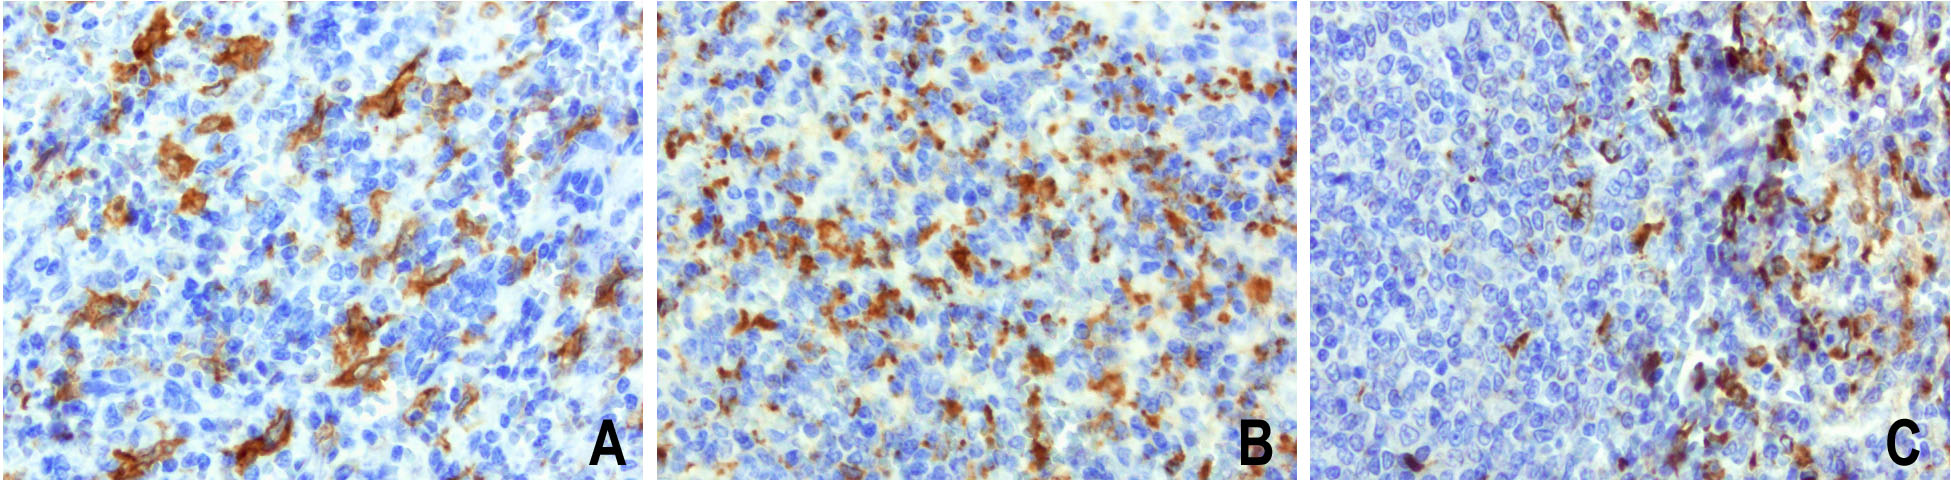 CD68 Antibody - Immunohistochemical staining of paraffin-embedded of 3 human spleen using anti-CD68 clone UMAB150 mouse monoclonal antibody at 1:200 dilution of 0.9mg/mL and detection with Polink2 Broad HRP DAB.requires heat-induced epitope retrieval with Accel 3in1 EDTA solution pH8.7 at 95-100C 20 minutes. The composit image of 3 human spleens show all showstrong membranous and cytoplasmic staining mainly in the red pulp region of spleen.